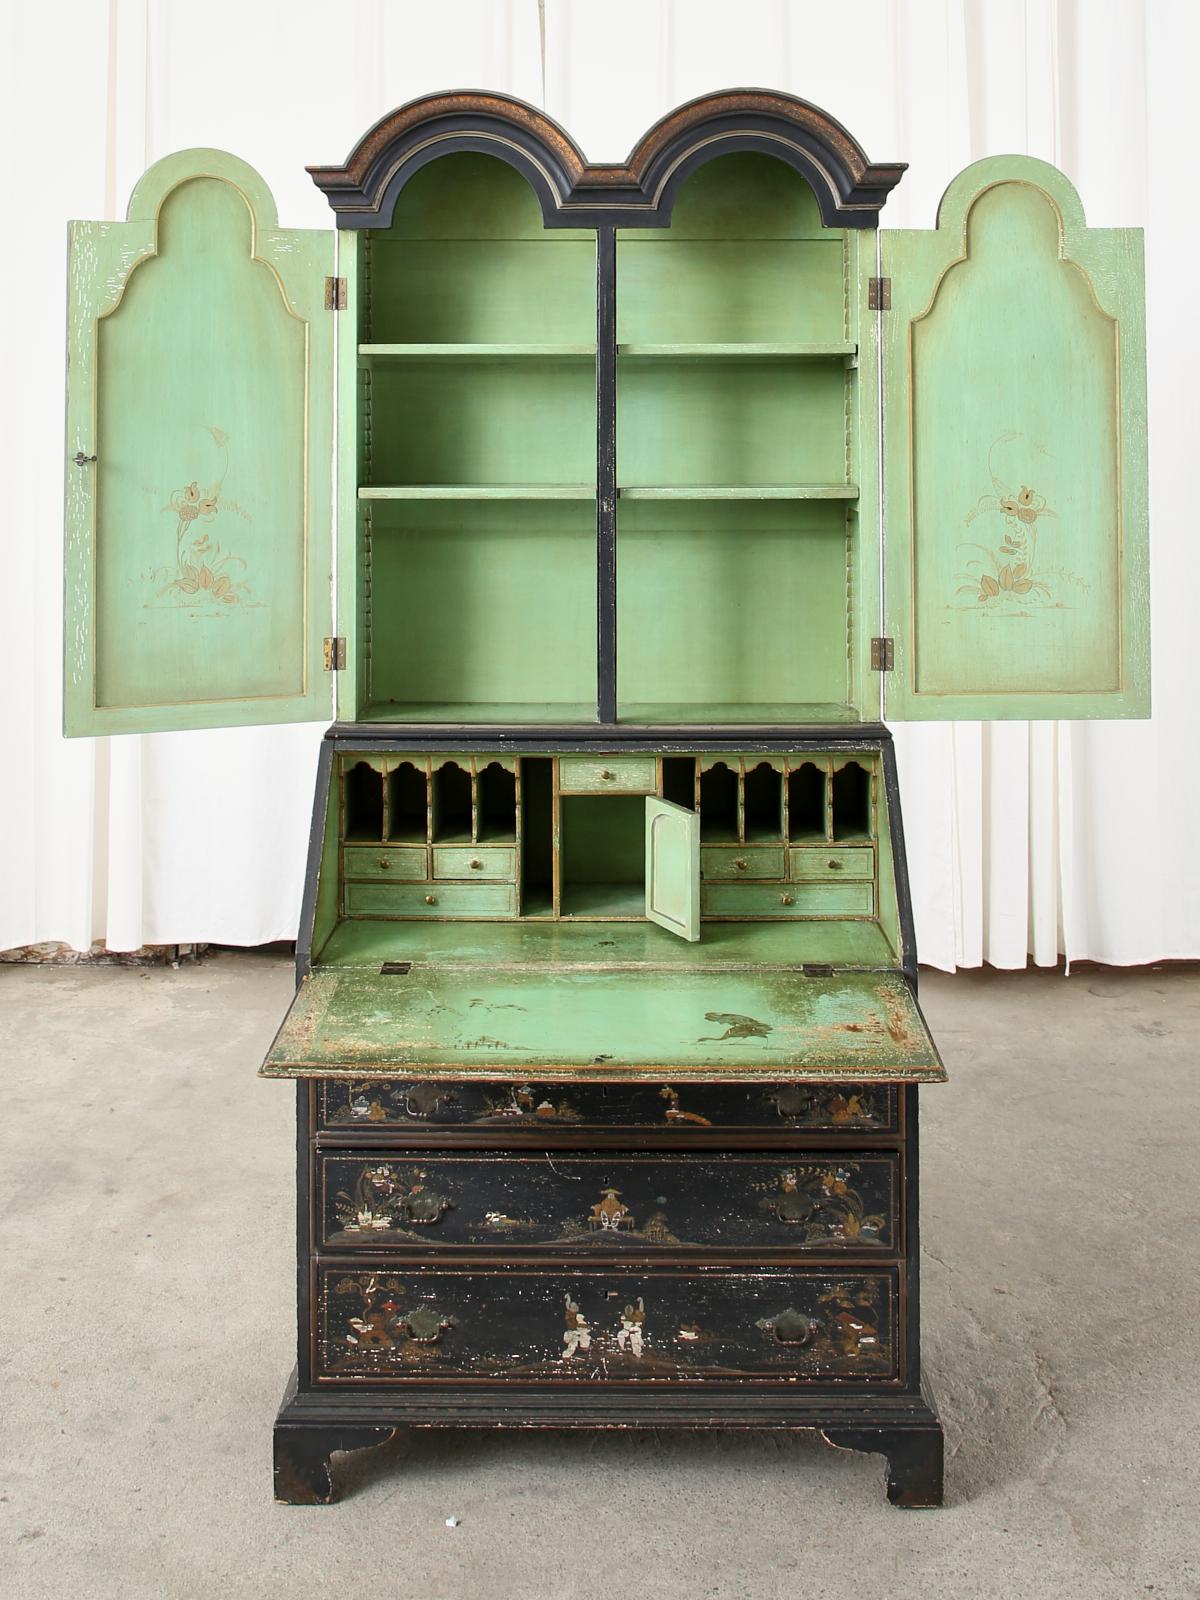 Distinctive Italian chinoiserie lacquered secretary bookcase crafted in the English George III taste. Decorated in the chinoiserie revival period of the early 20th century Europe. The two-piece case features a black lacquer ground embellished with